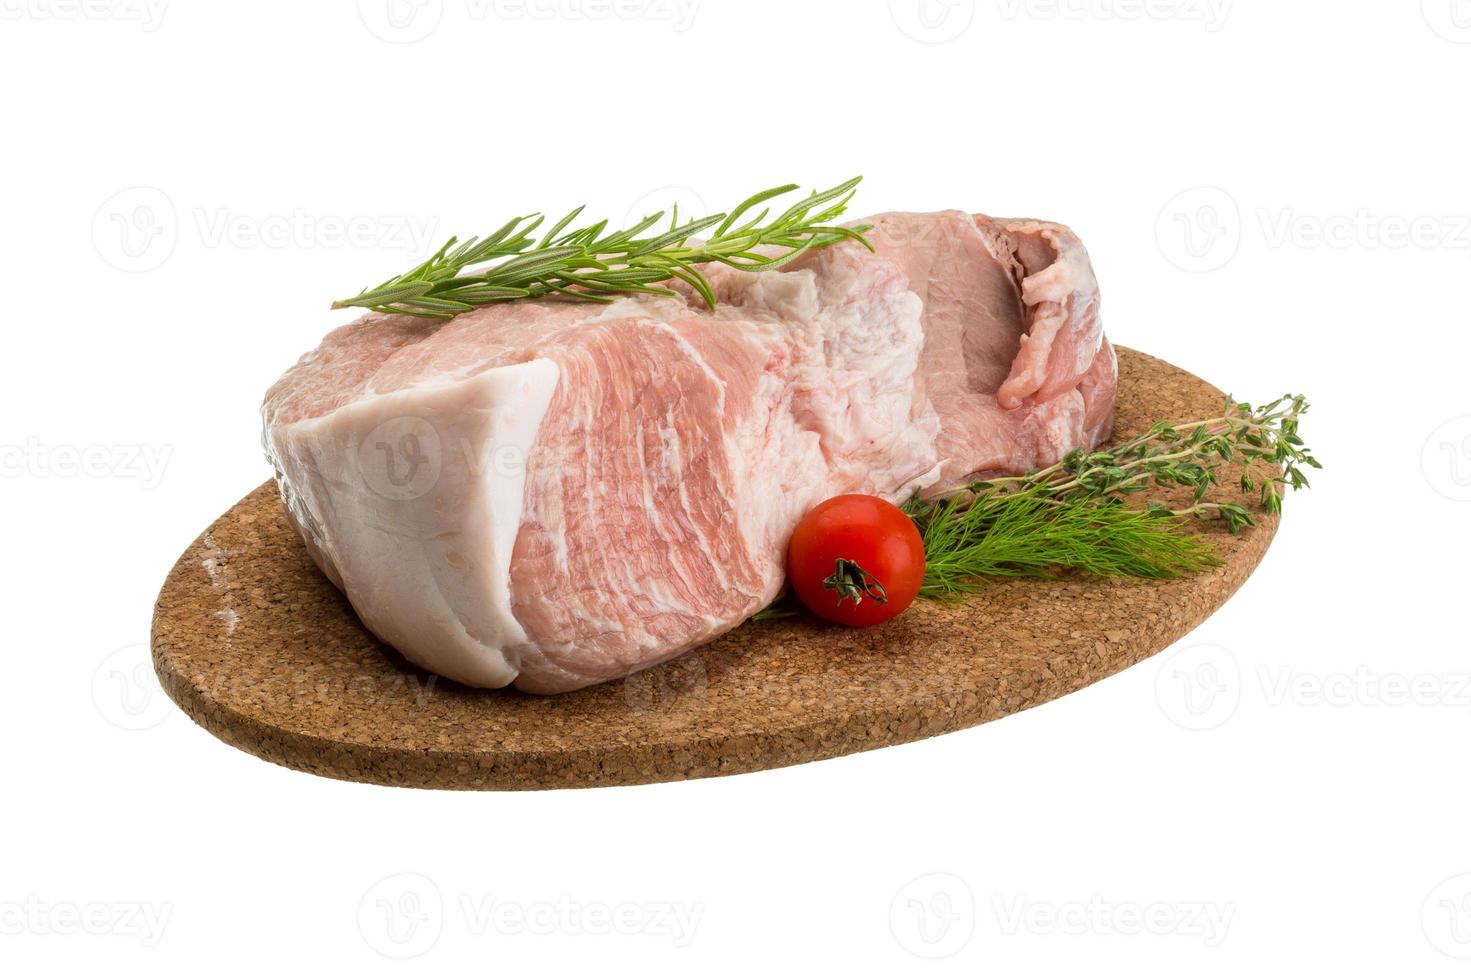 Raw pork meat on wooden plate and white background photo